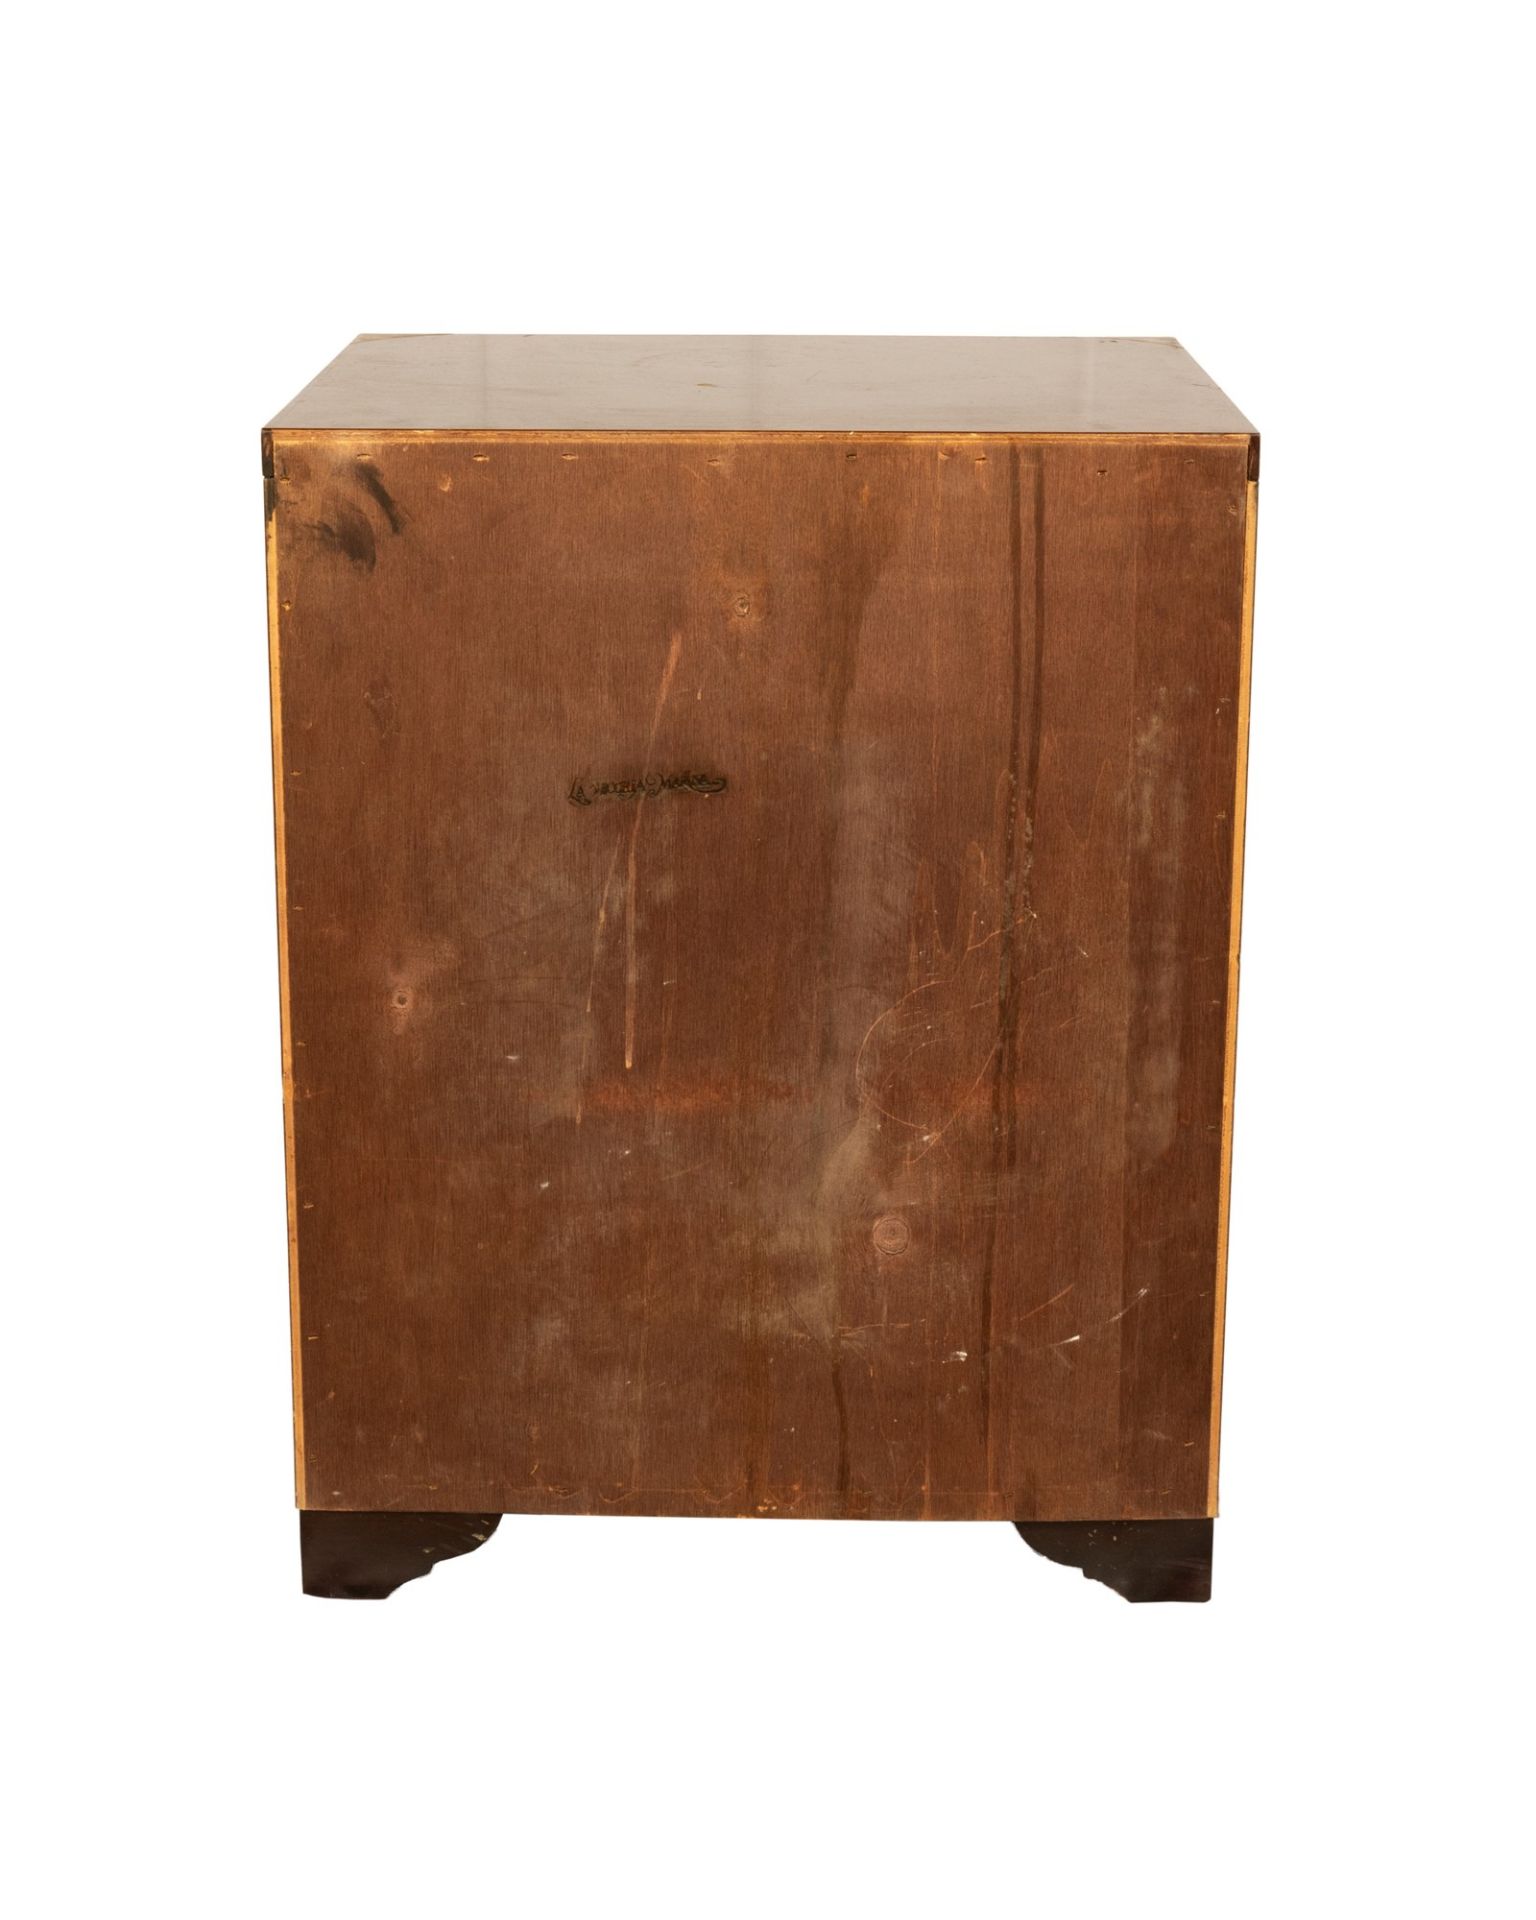 Antica Marina wooden bedside table with brass inserts - Image 22 of 23